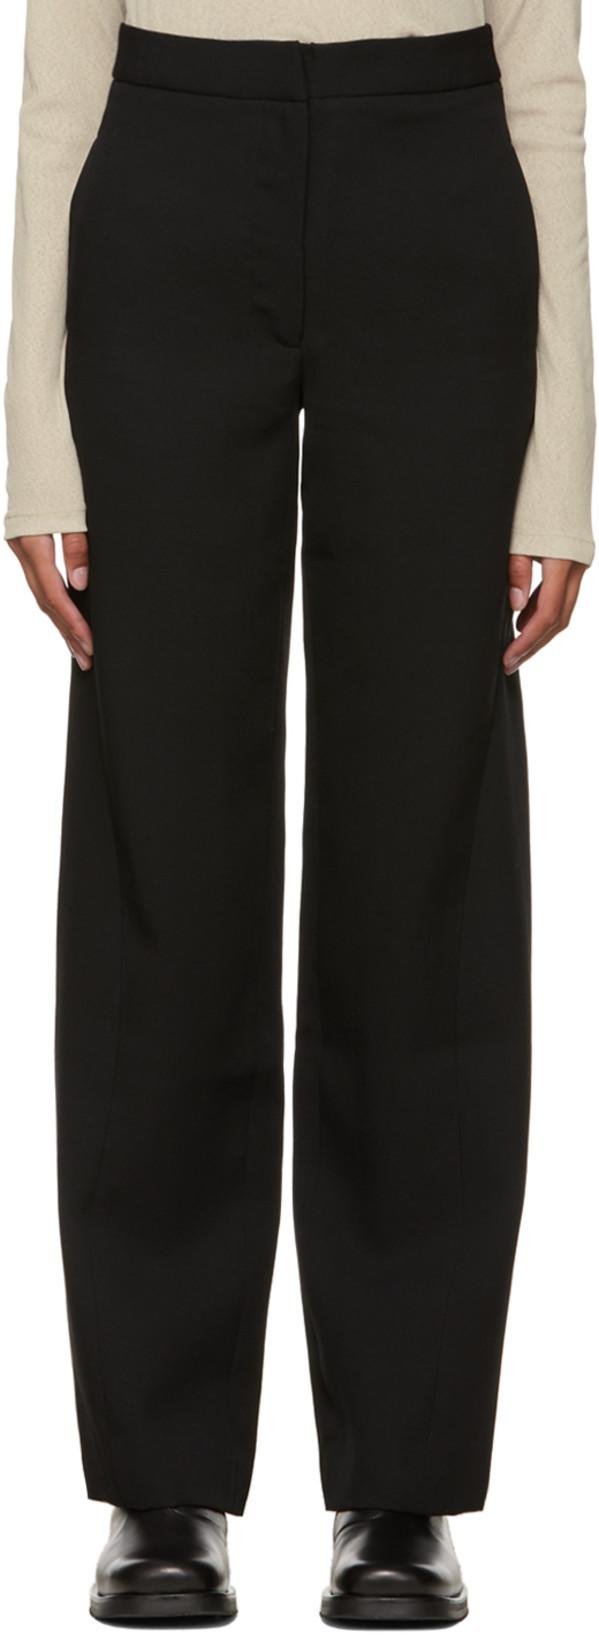 Black Twisted Inseams Trousers by DEVEAUX NEW YORK